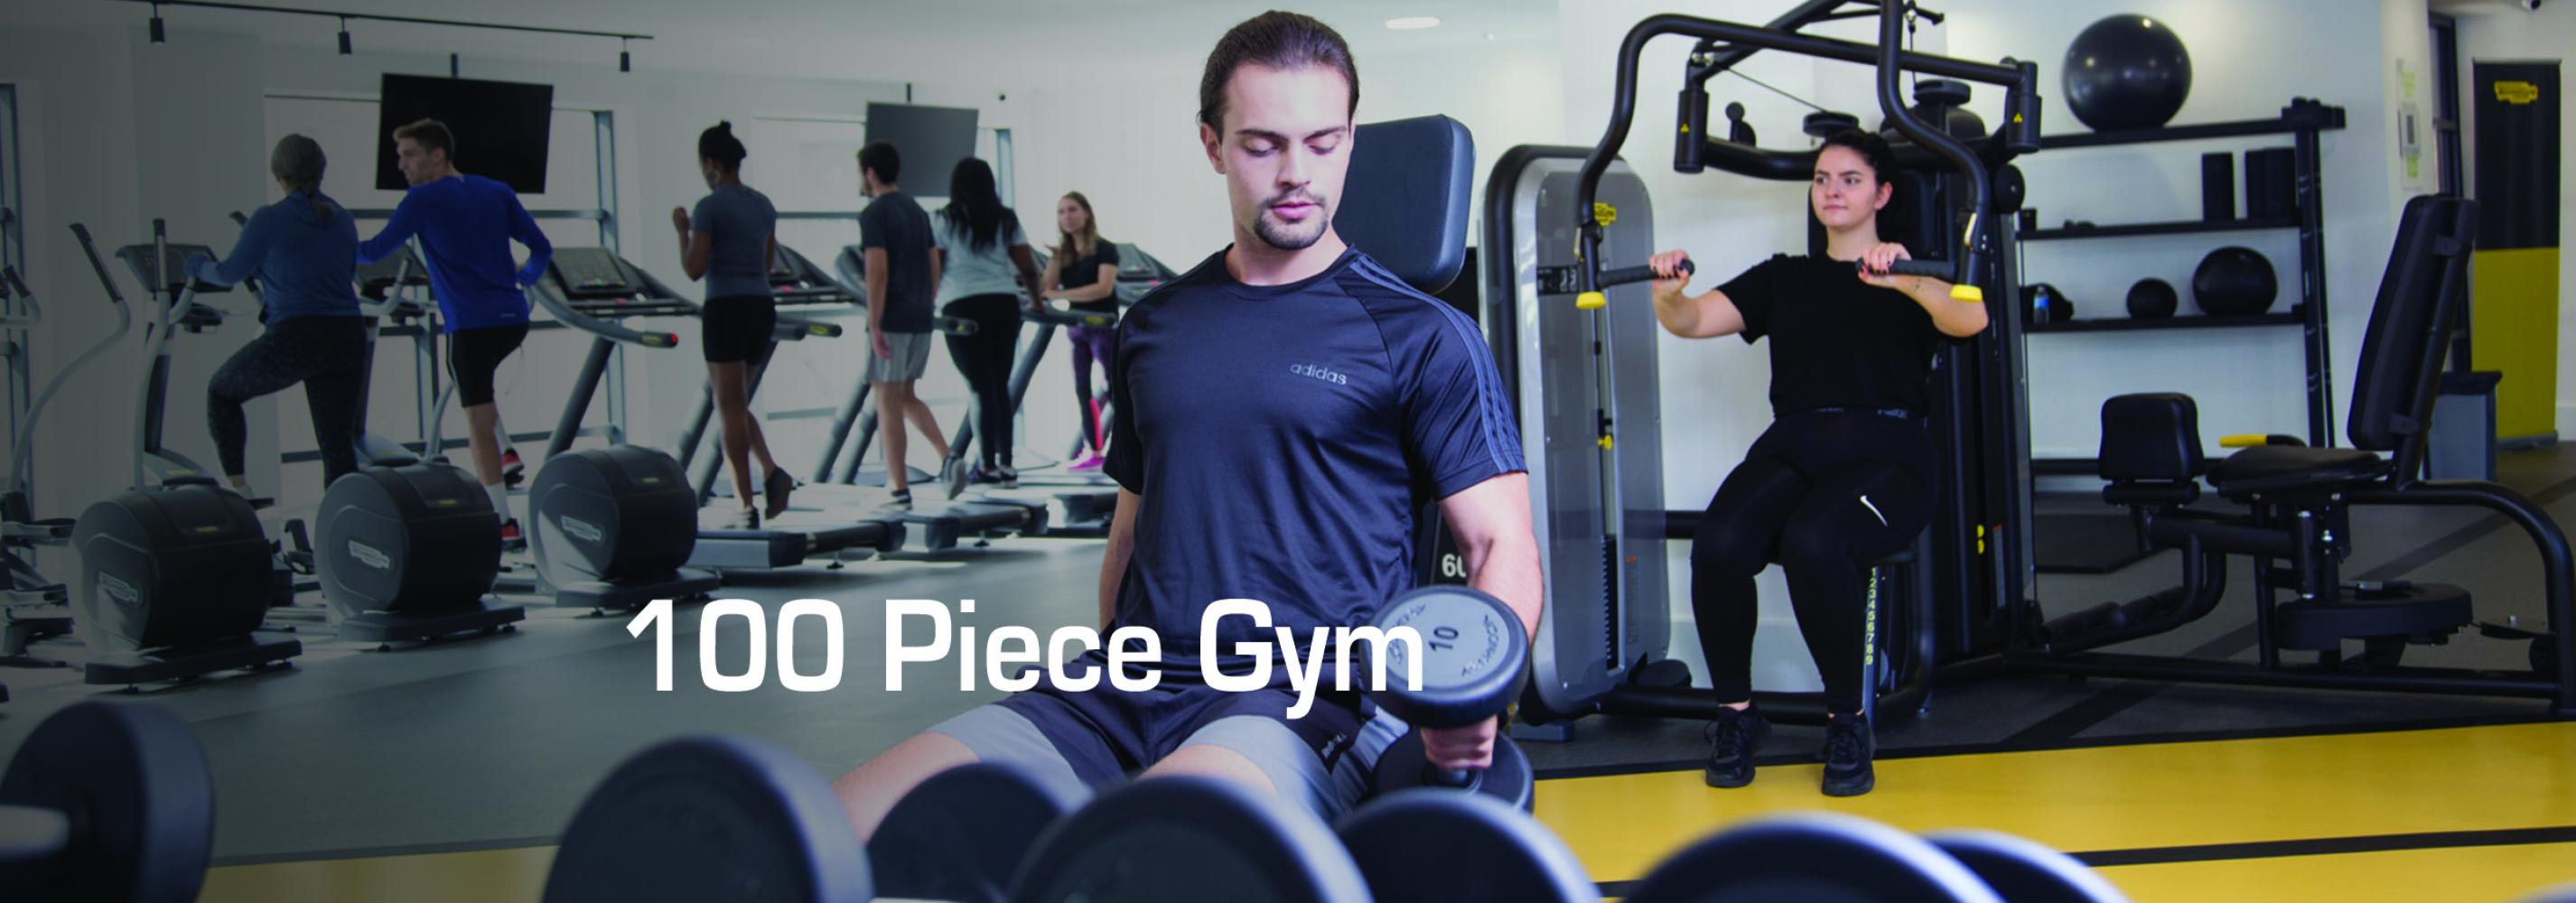 State-of-the-Art, 100 piece air-conditioned gym with Technogym equipment